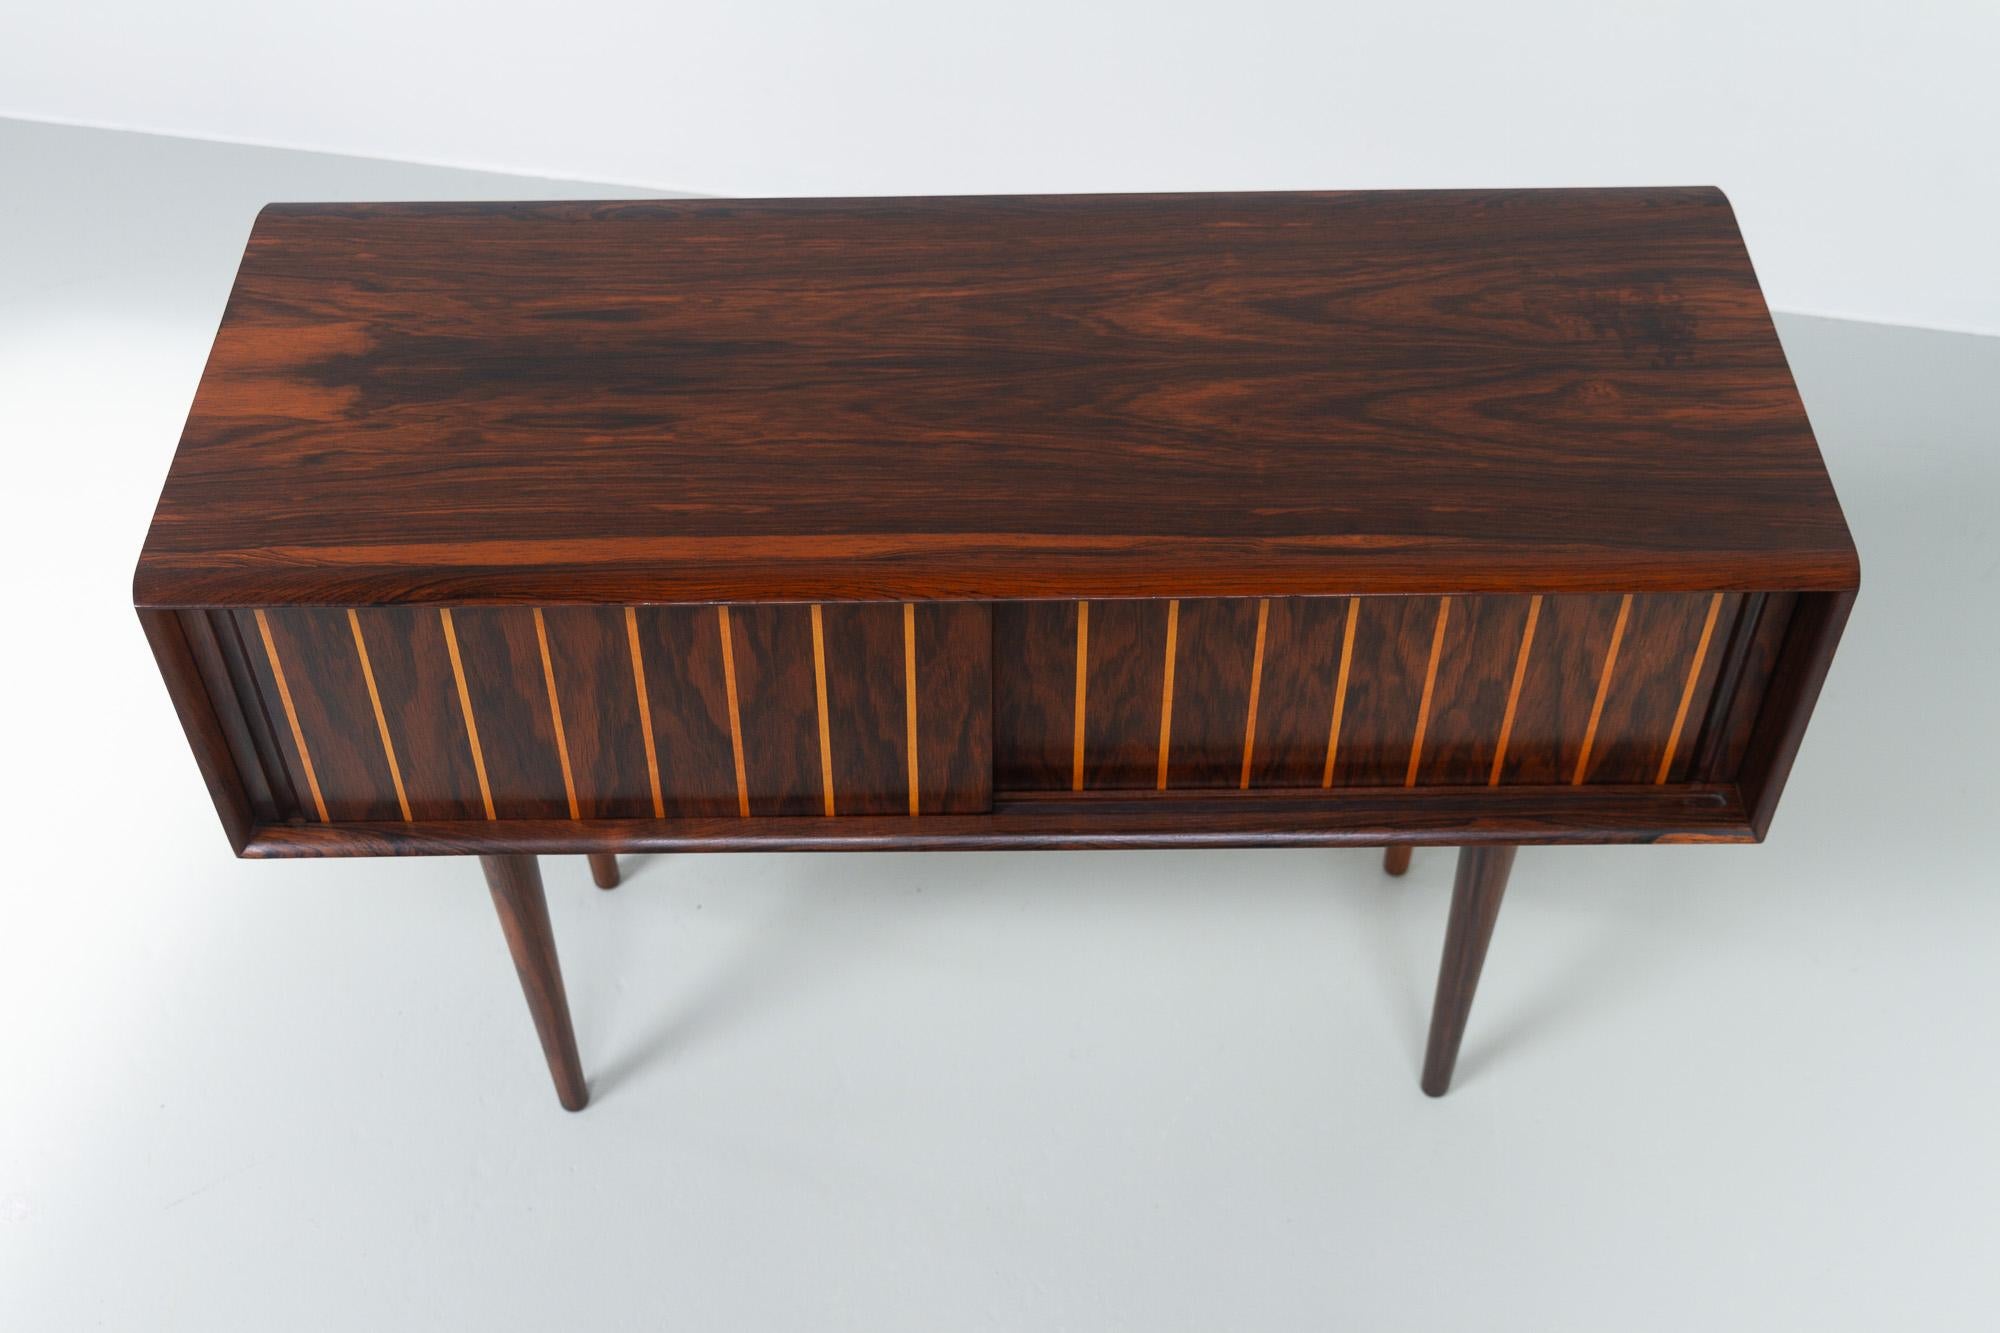 Danish Mid-Century Modern Small Rosewood Sideboard, 1950s.
Very lovely and exquisite small Danish design chest, most likely made Danish cabinetmaker L. Chr. Larsen & Søn, Denmark in the 1950s. But also sometimes attributed to Max Rasmussen, Odense.